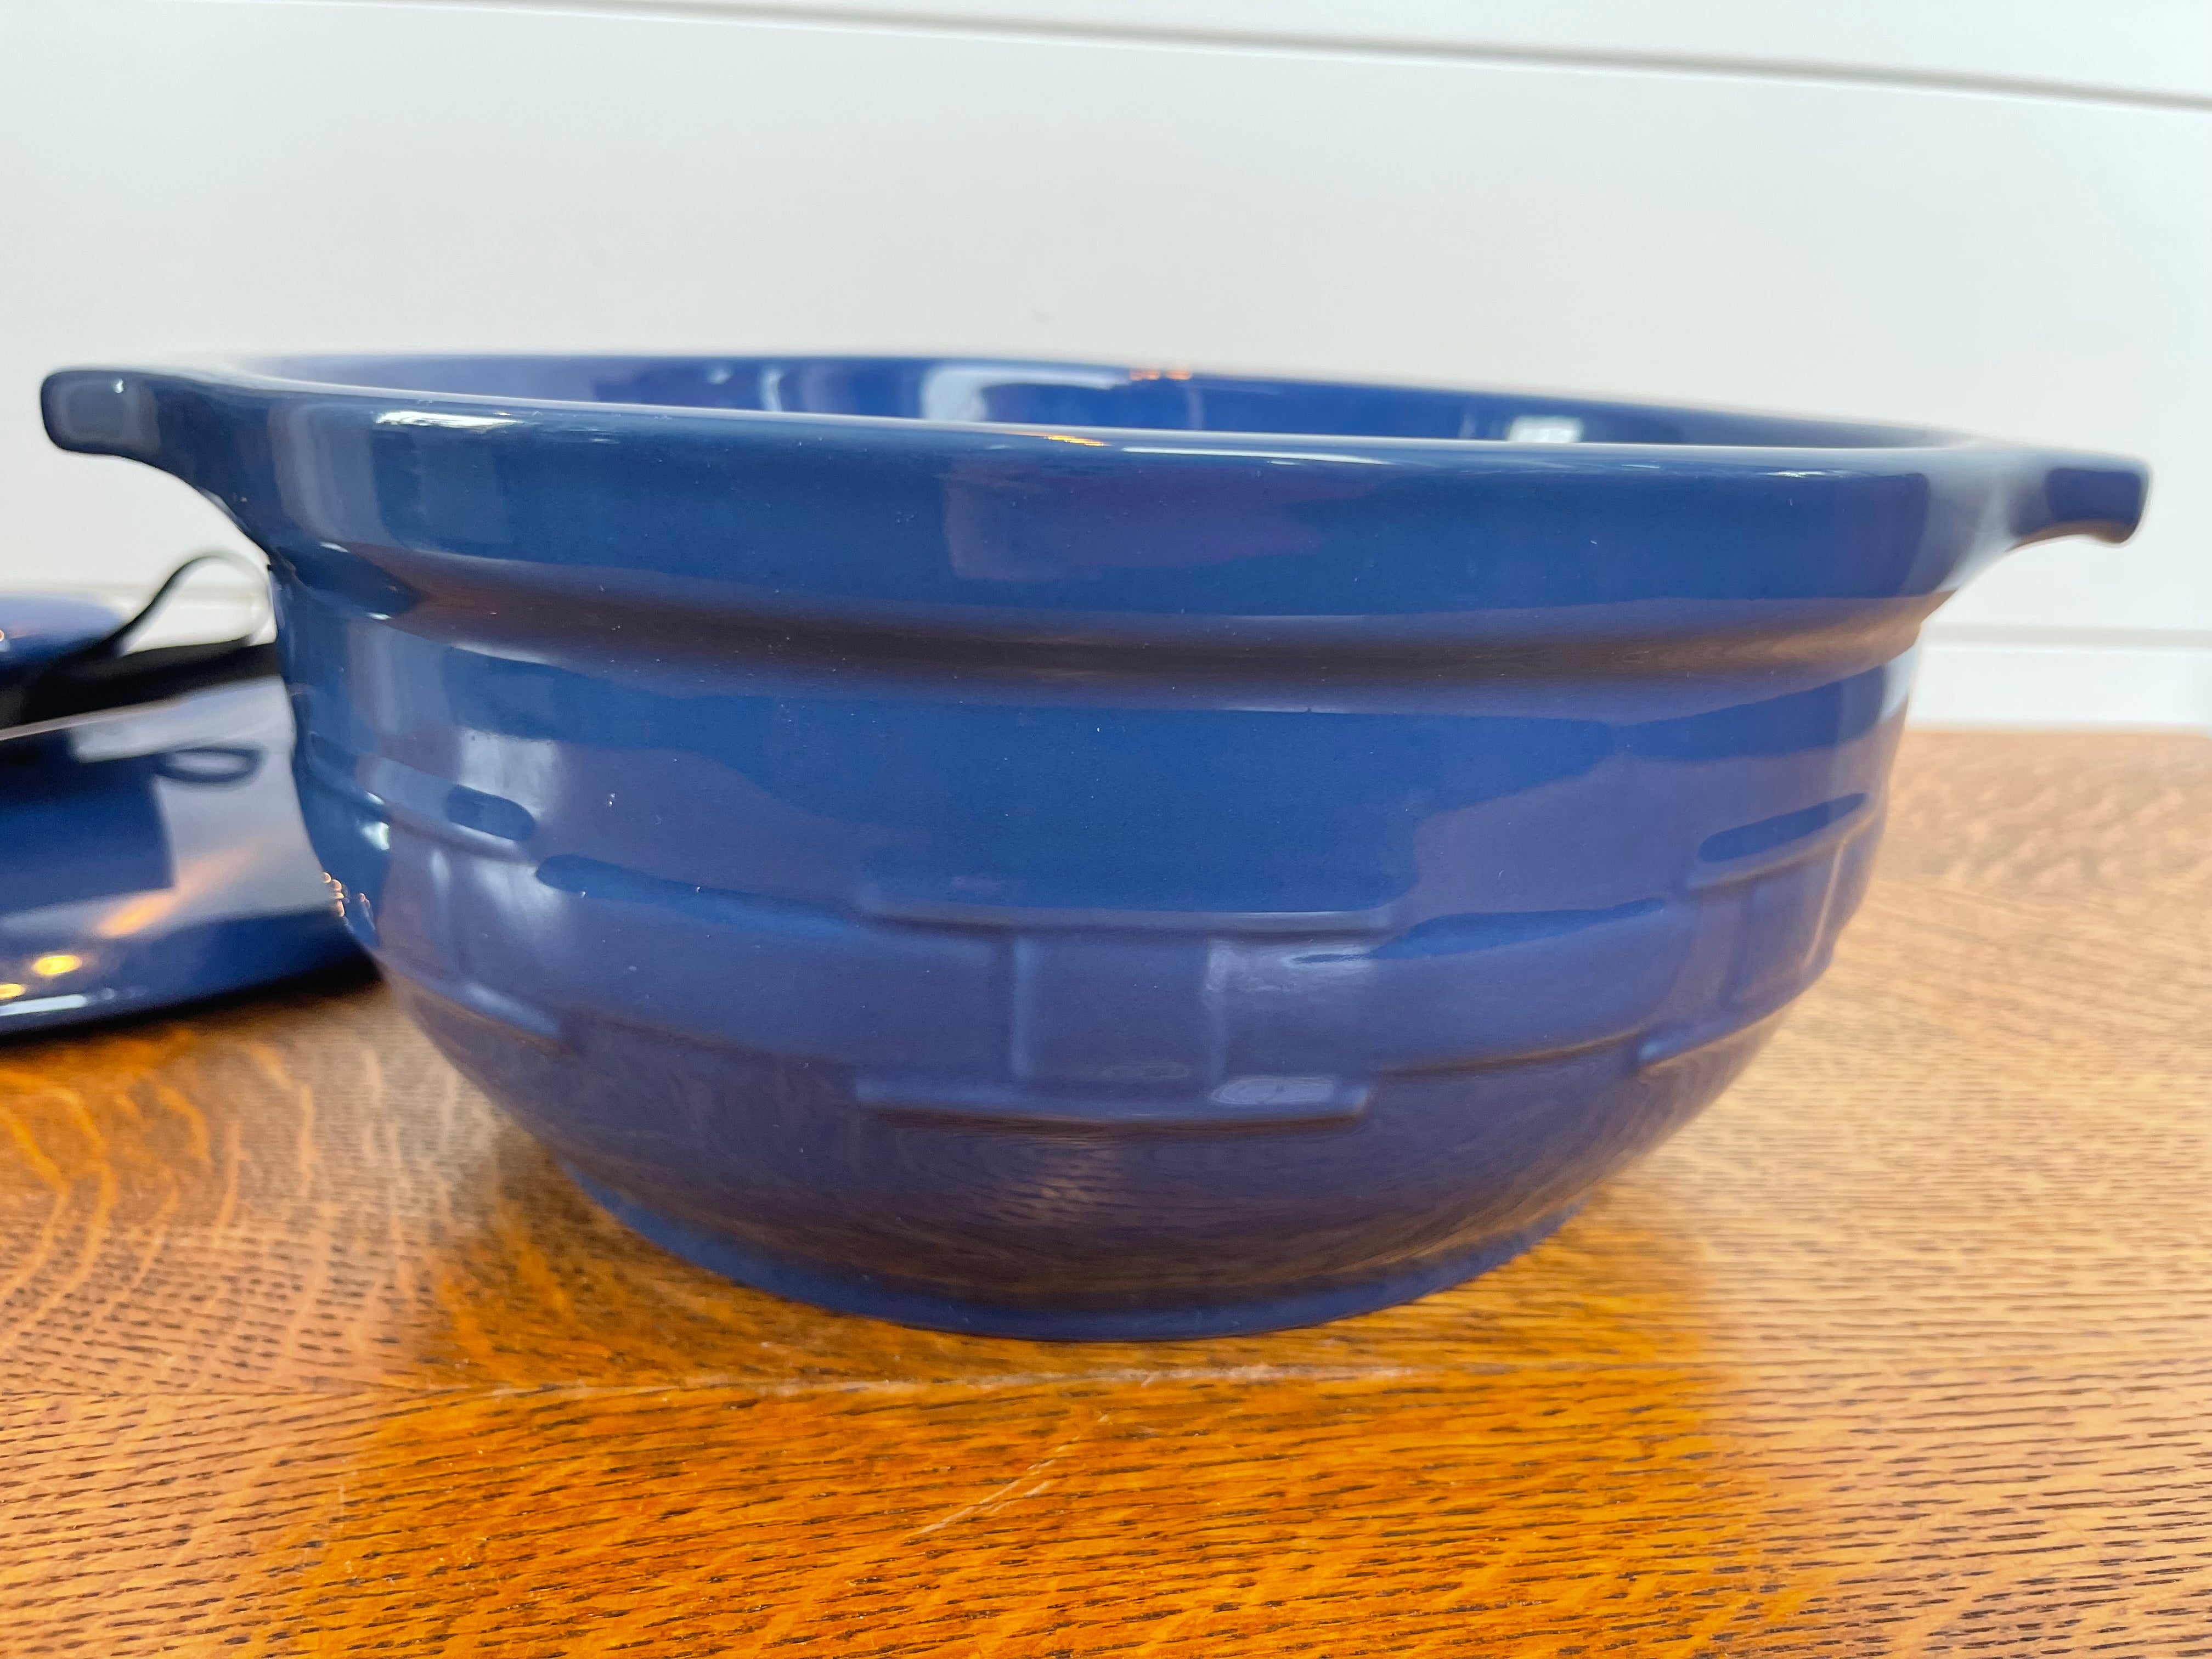 Longberger Pottery Made in the USA Covered Casserole